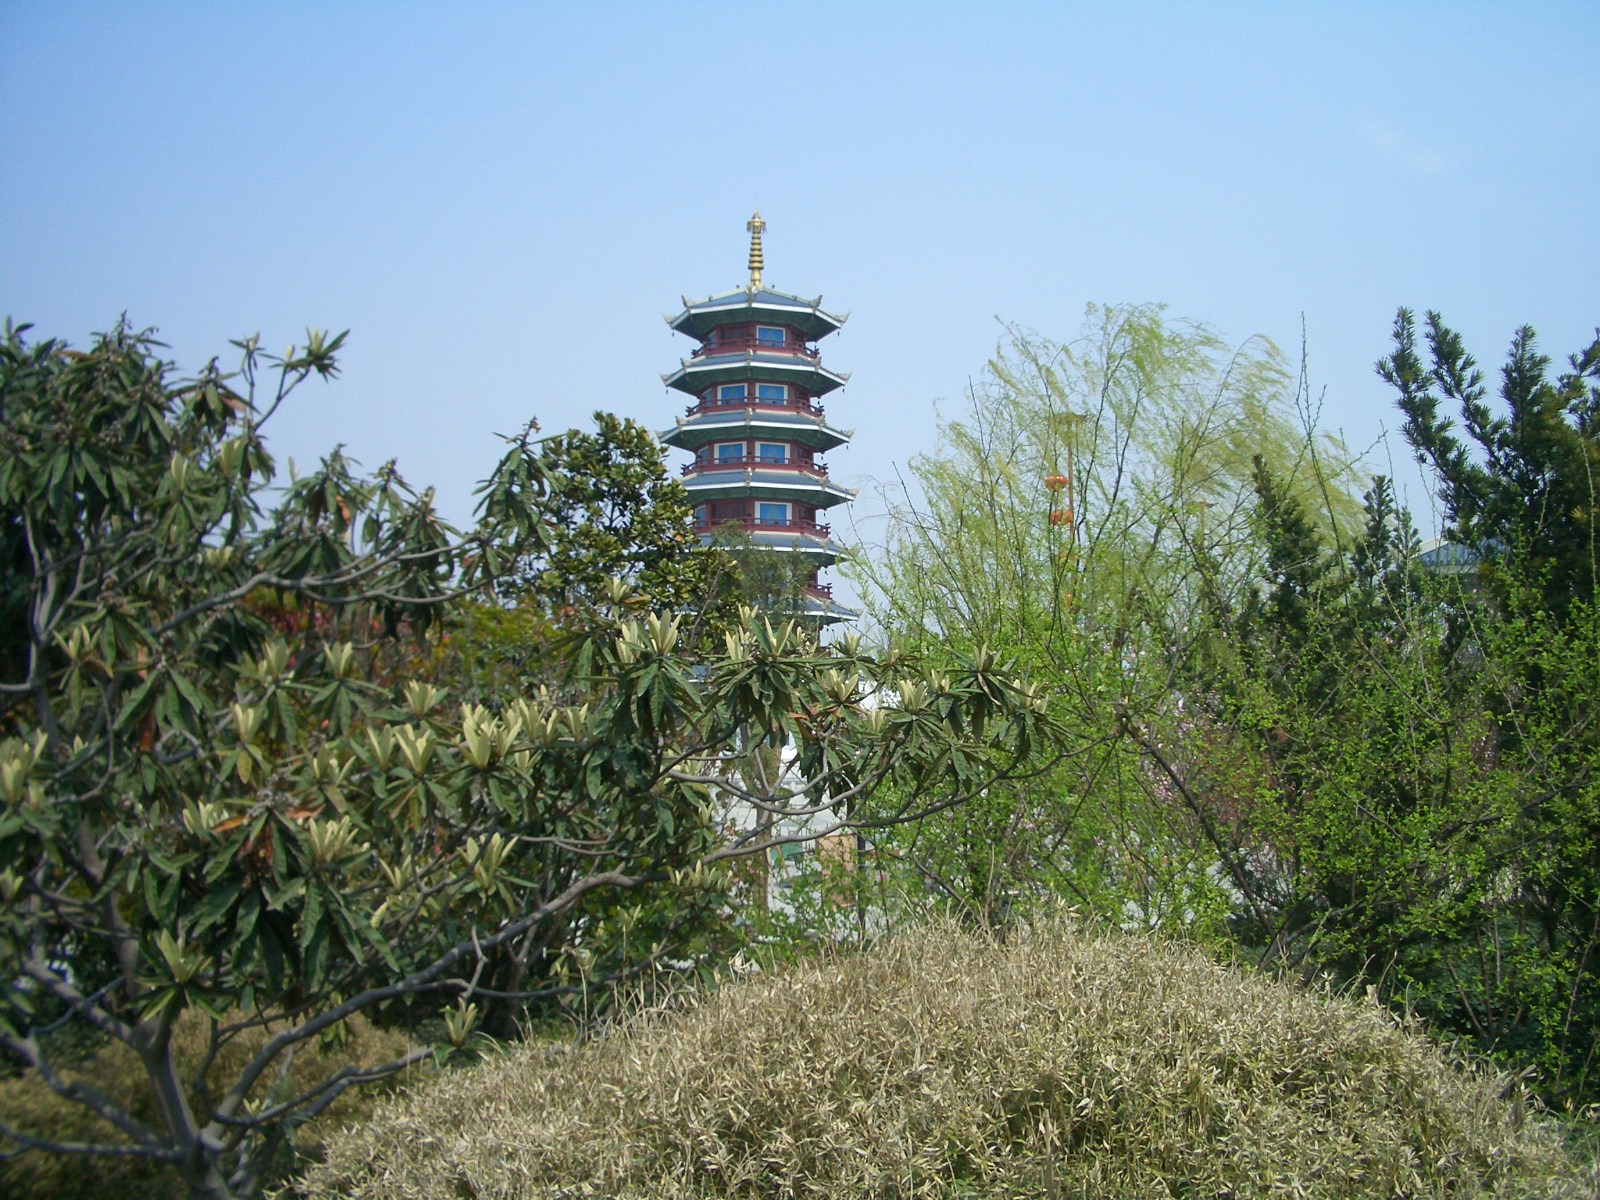 the pagoda is surrounded by some trees and bushes